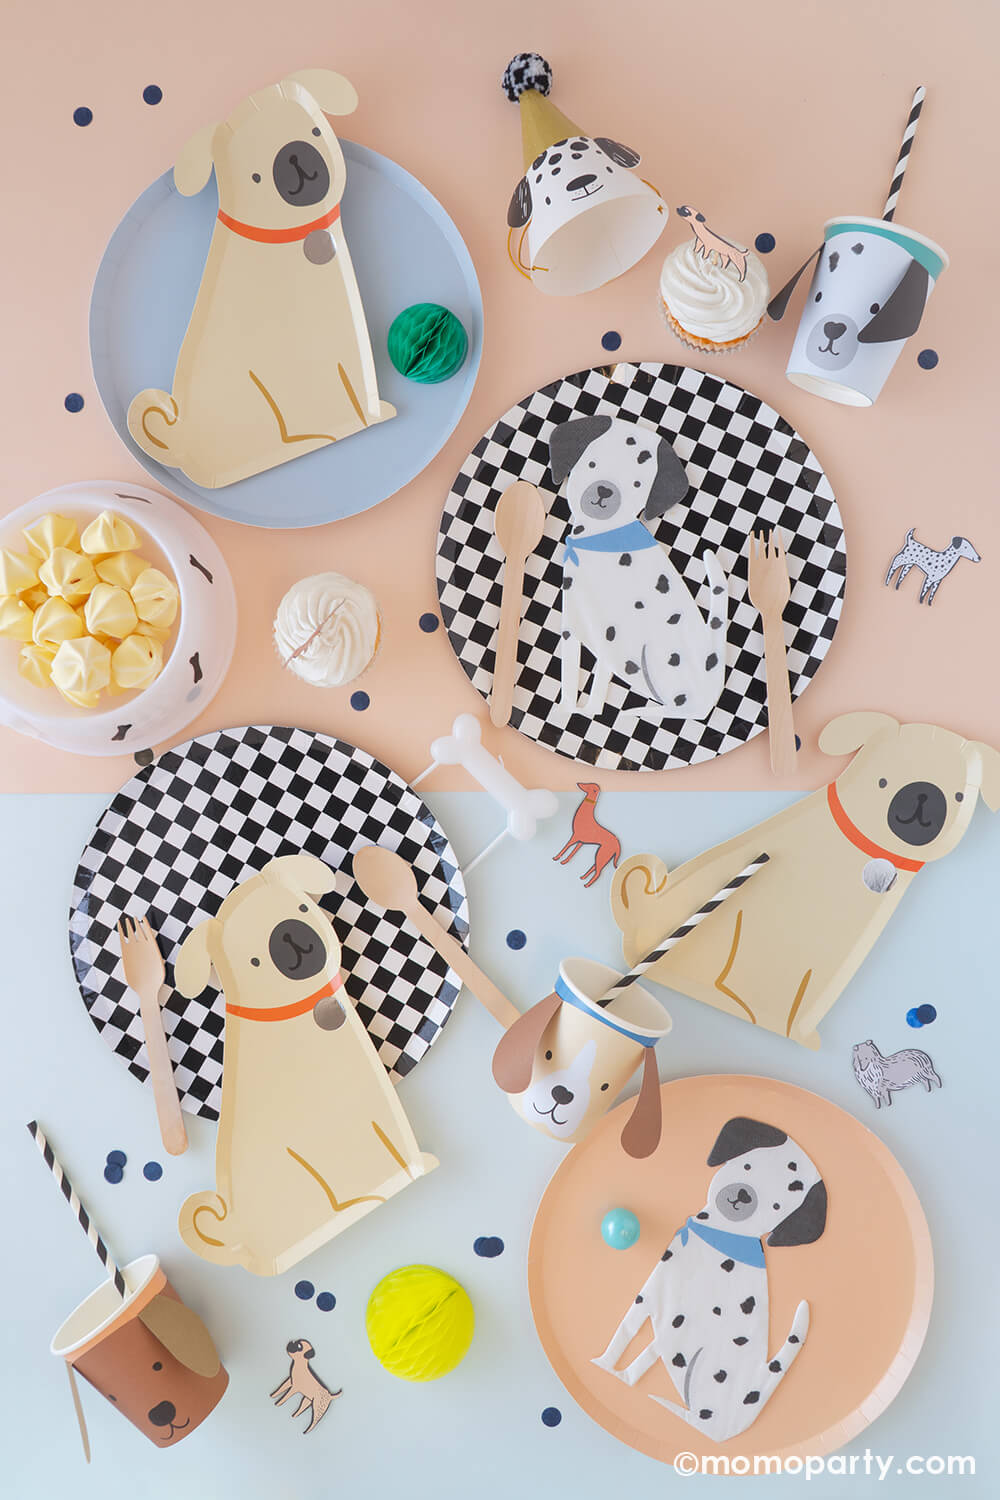 A soft color table with light blue and light peach colored tablecloth filled with Momo Party's dog themed party supplies including 10" black and white checkered round dinner plates, 8.5" x 9" pug dog shaped plates by Meri Meri, Dalmatian shaped napkins, 3D dog party cups and dog shaped party hats, along with yummy treats topped with dog themed cake toppers and bone shaped candle, it makes a great inspo for kid's puppy themed birthday party or a party for your four legged friend!